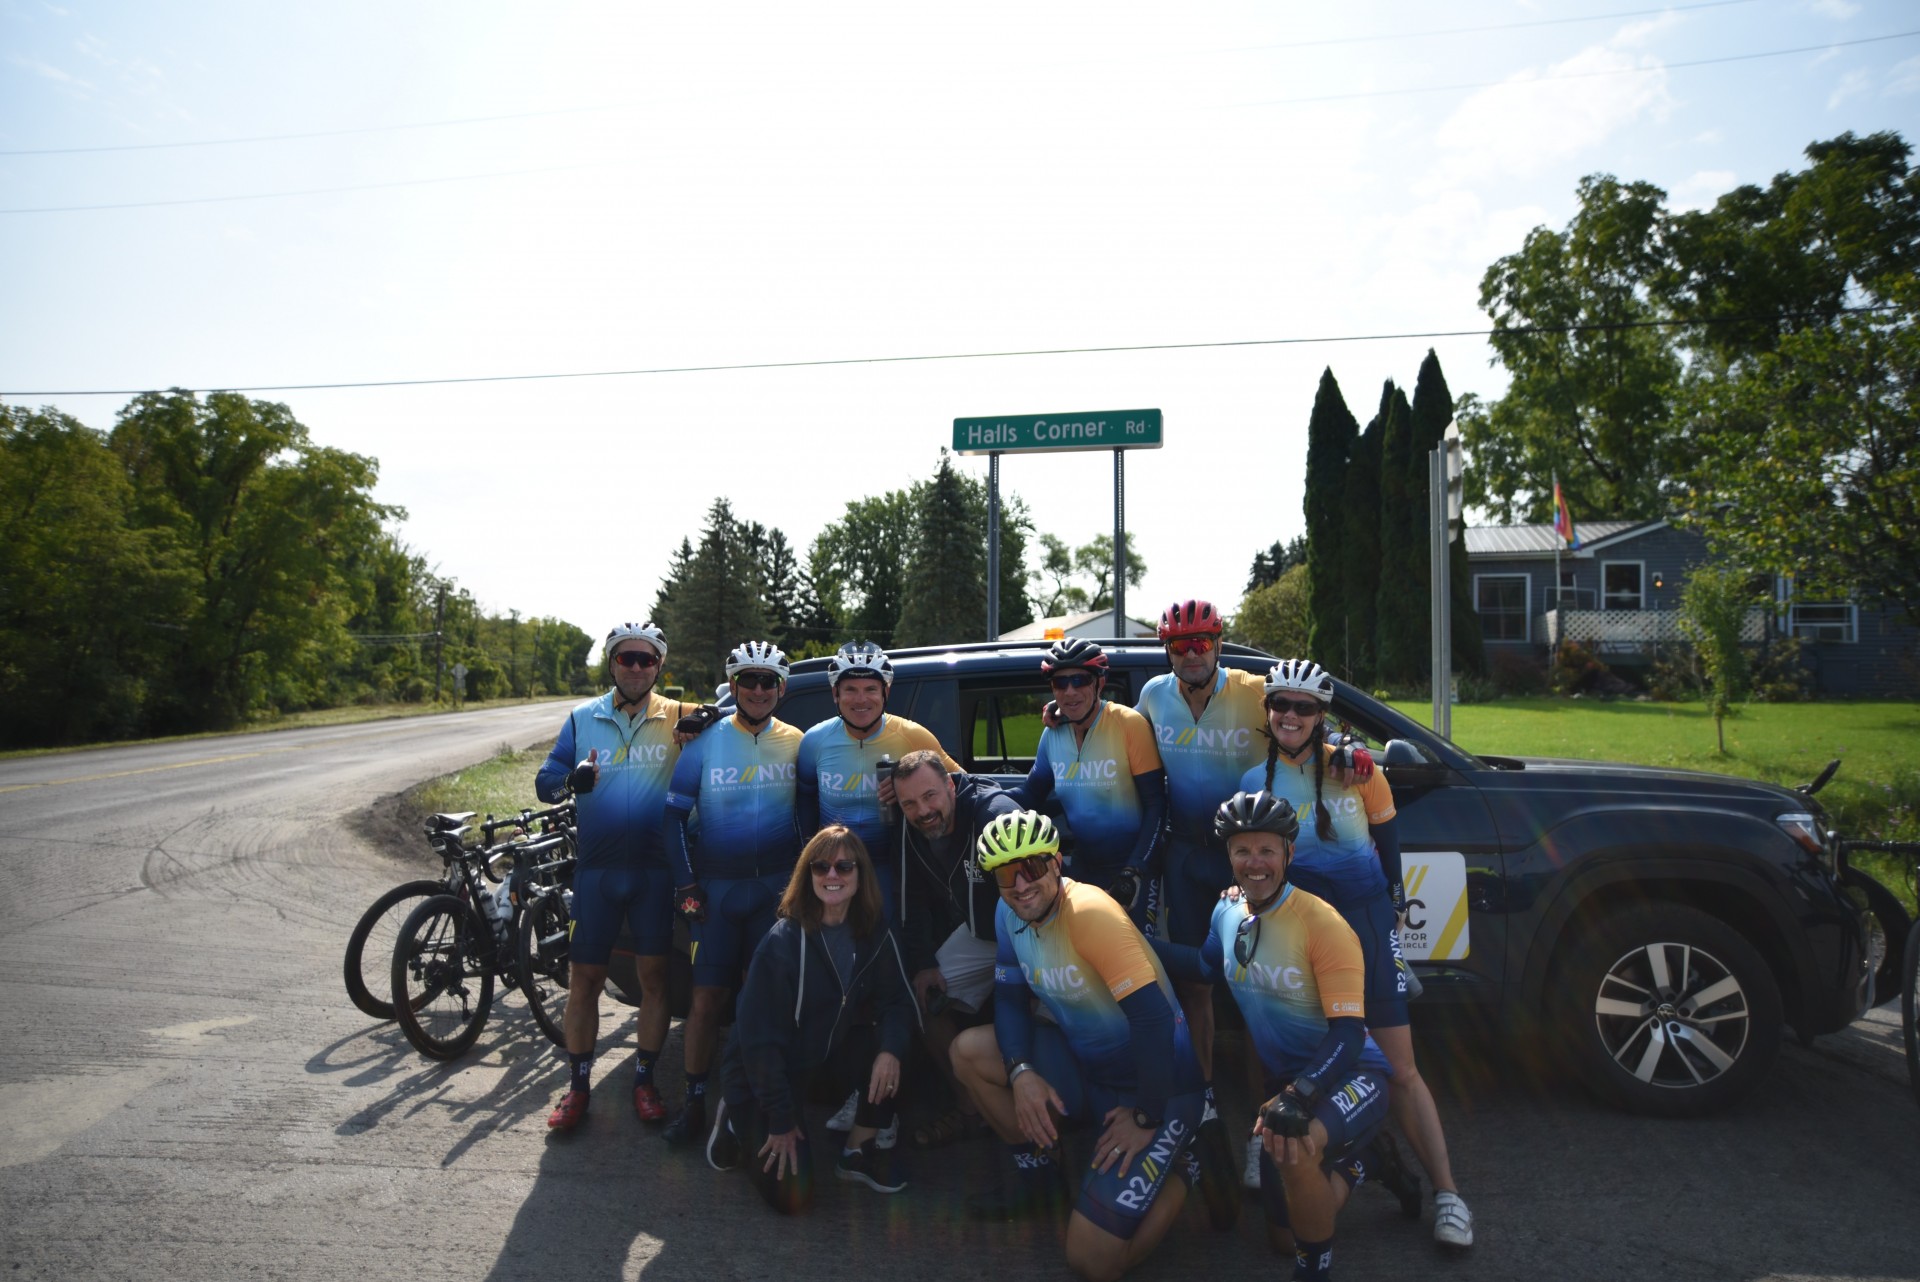 support crew members pictured with riders at a stop in front of a car on a sunny day with trees in the background